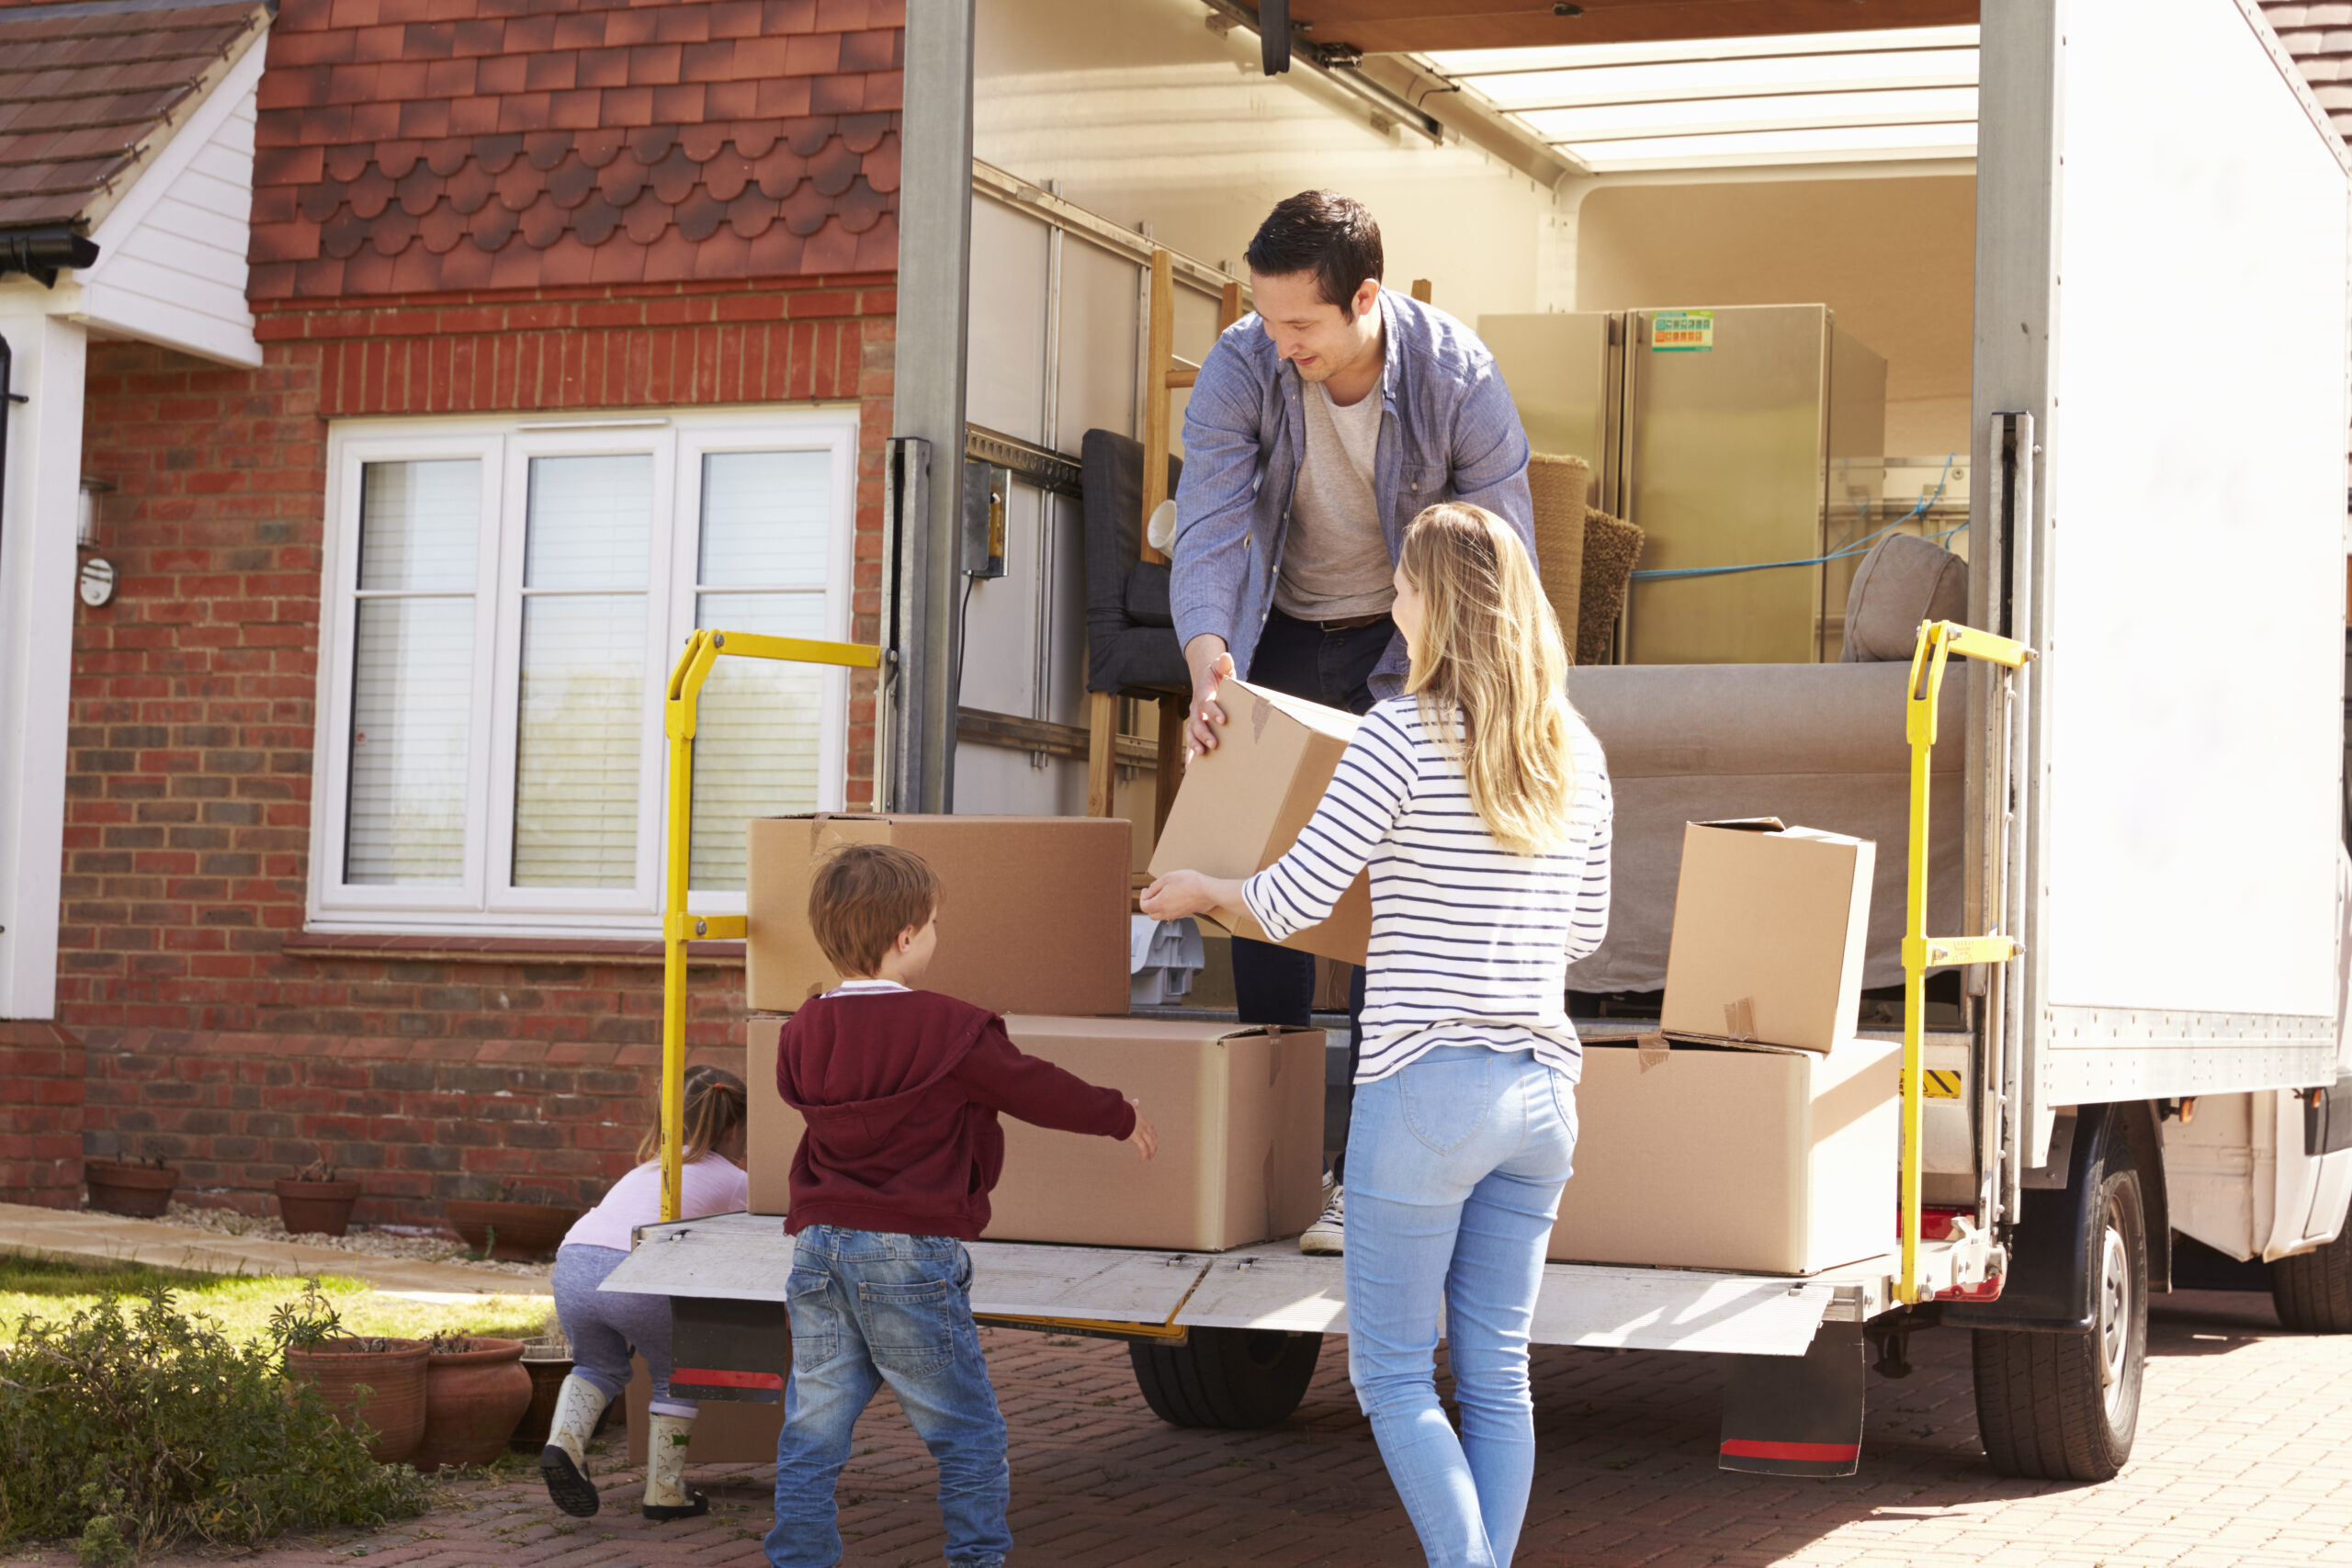 5 Tips for Moving House for New Homeowners